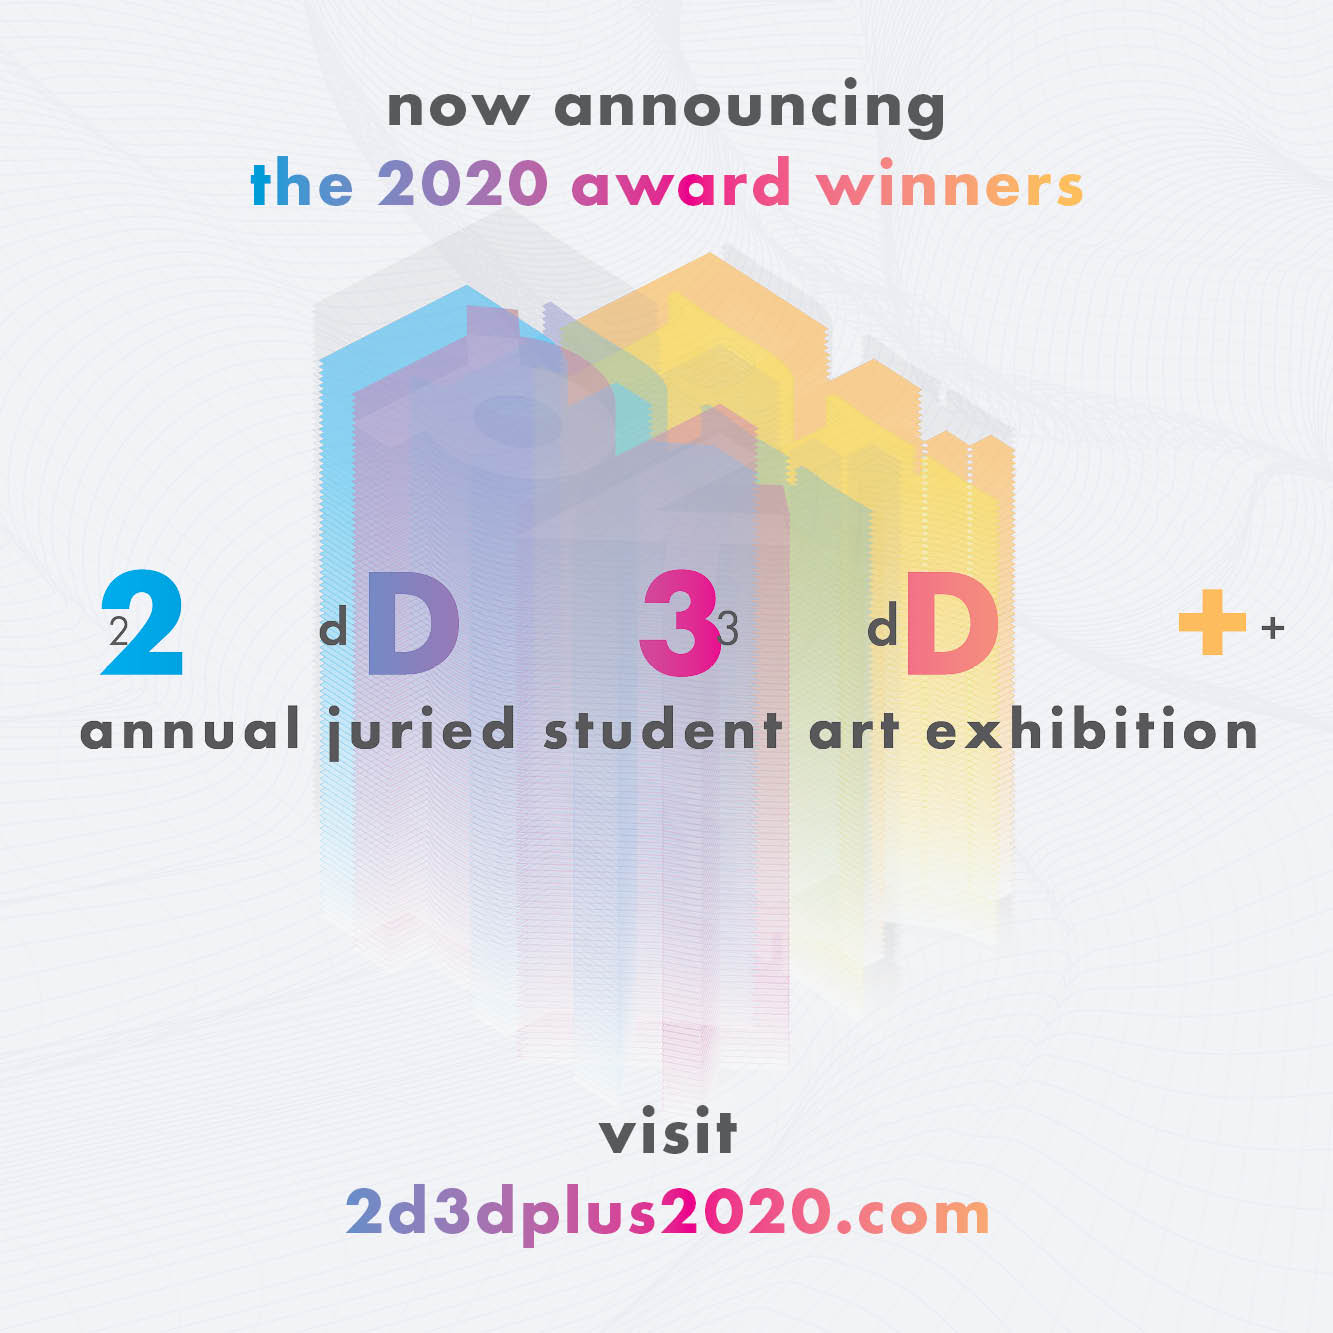 Now announcing the 2020 Award Winners 2d3d+ Annual Juried Student Art Competition. Visit 2d3dplus2020.com